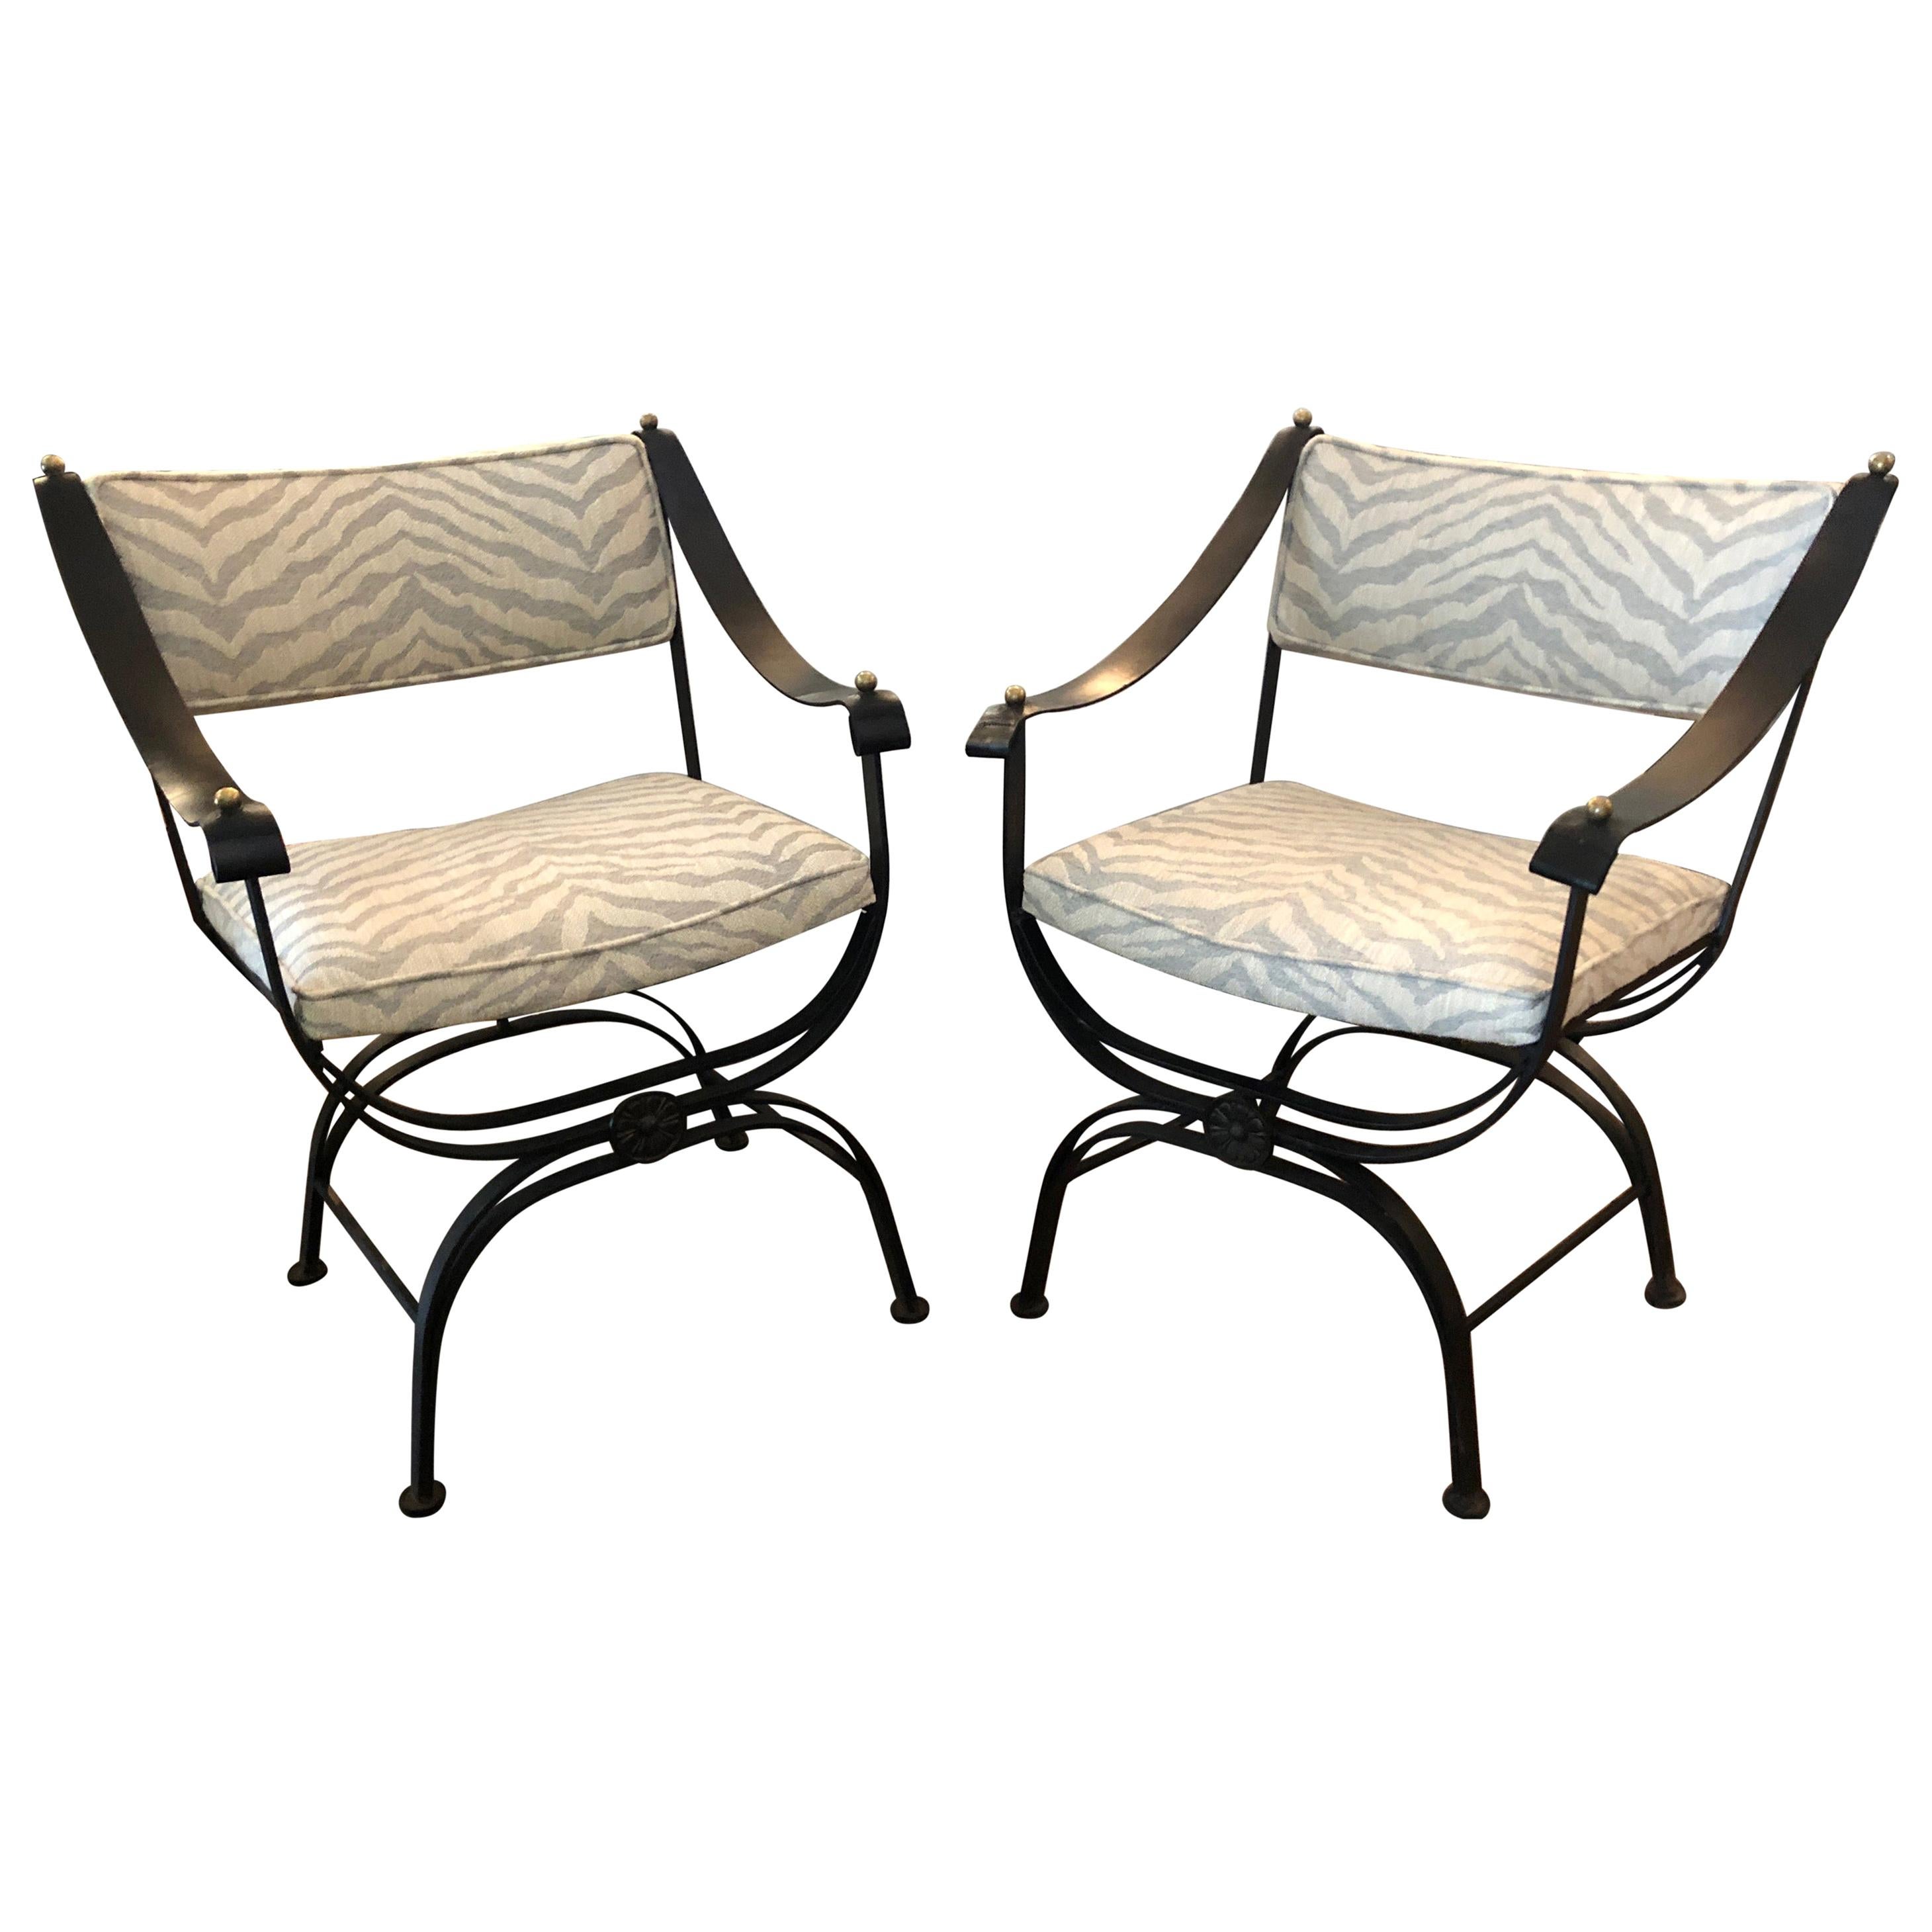 Sensational Pair of Campaign Style Wrought Iron Club Chairs with Leather Arms